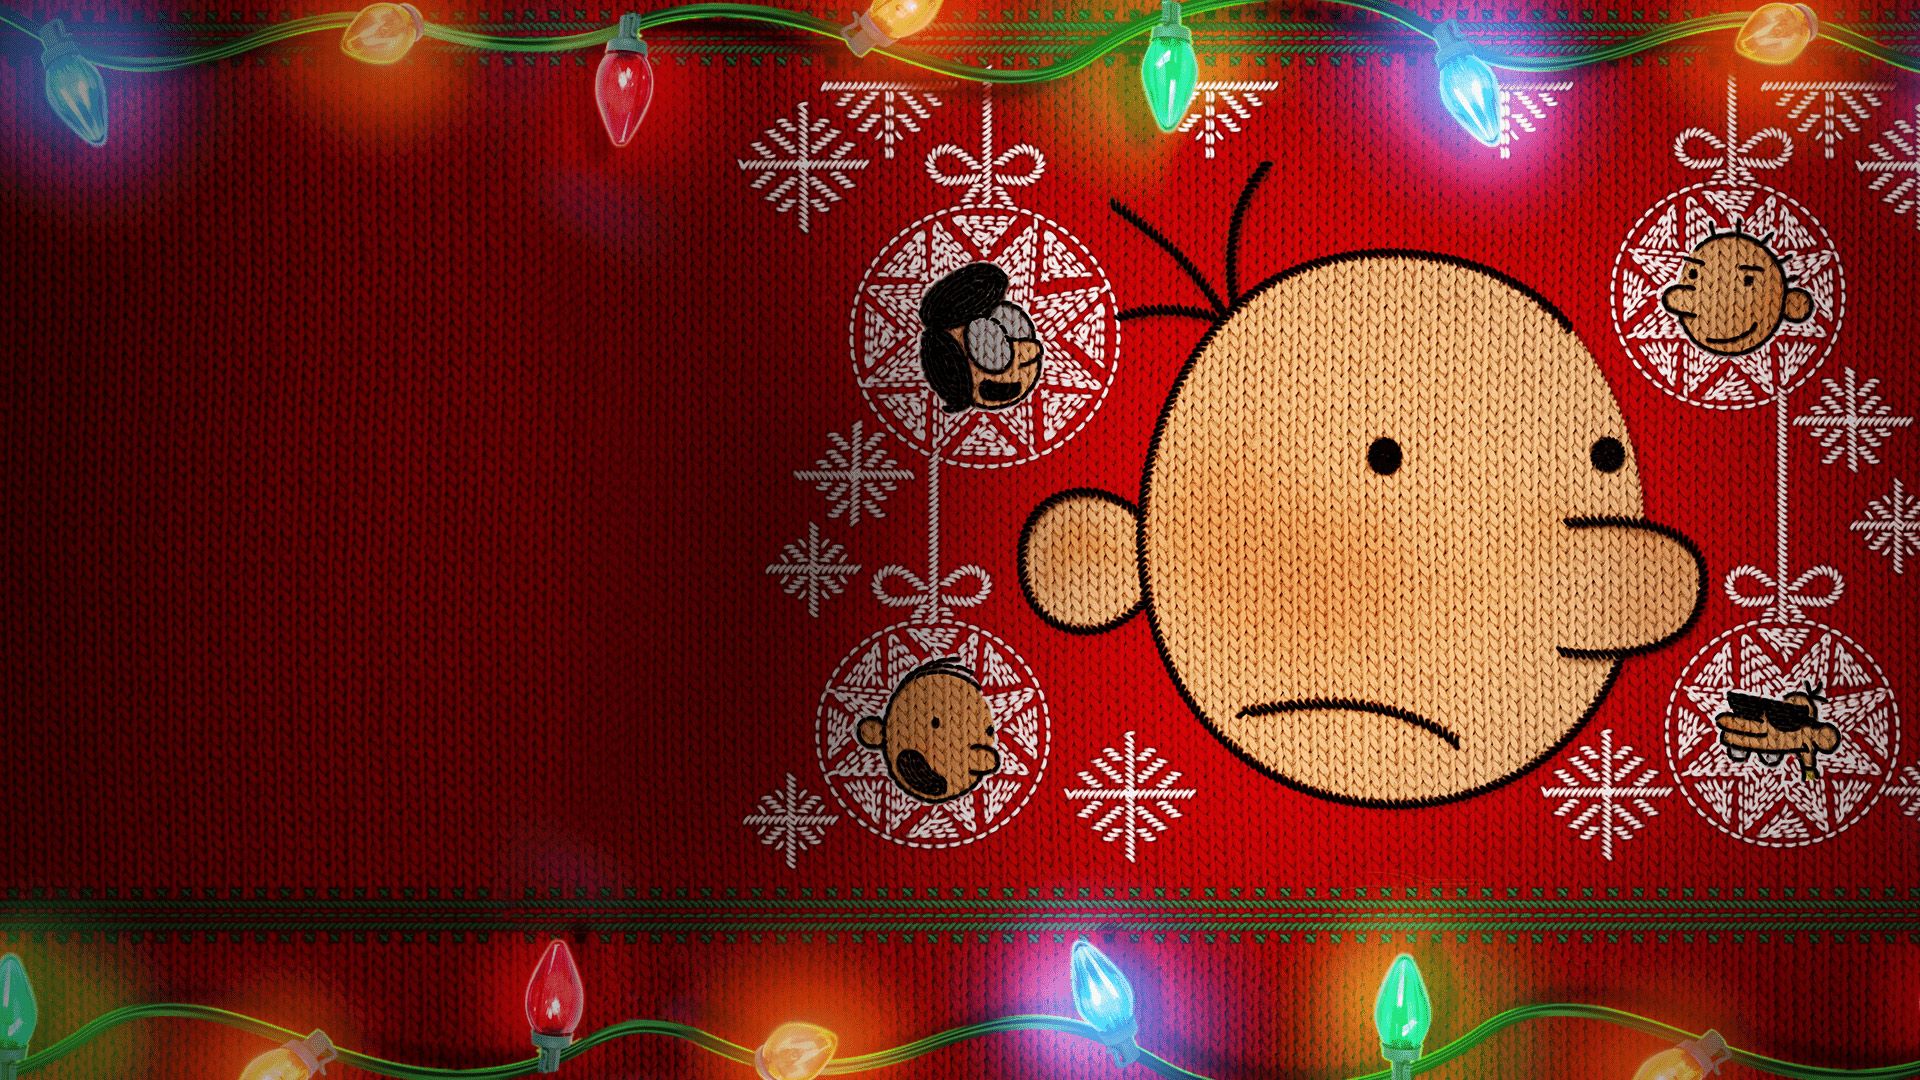 Diary of a Wimpy Kid Christmas: Cabin Fever background